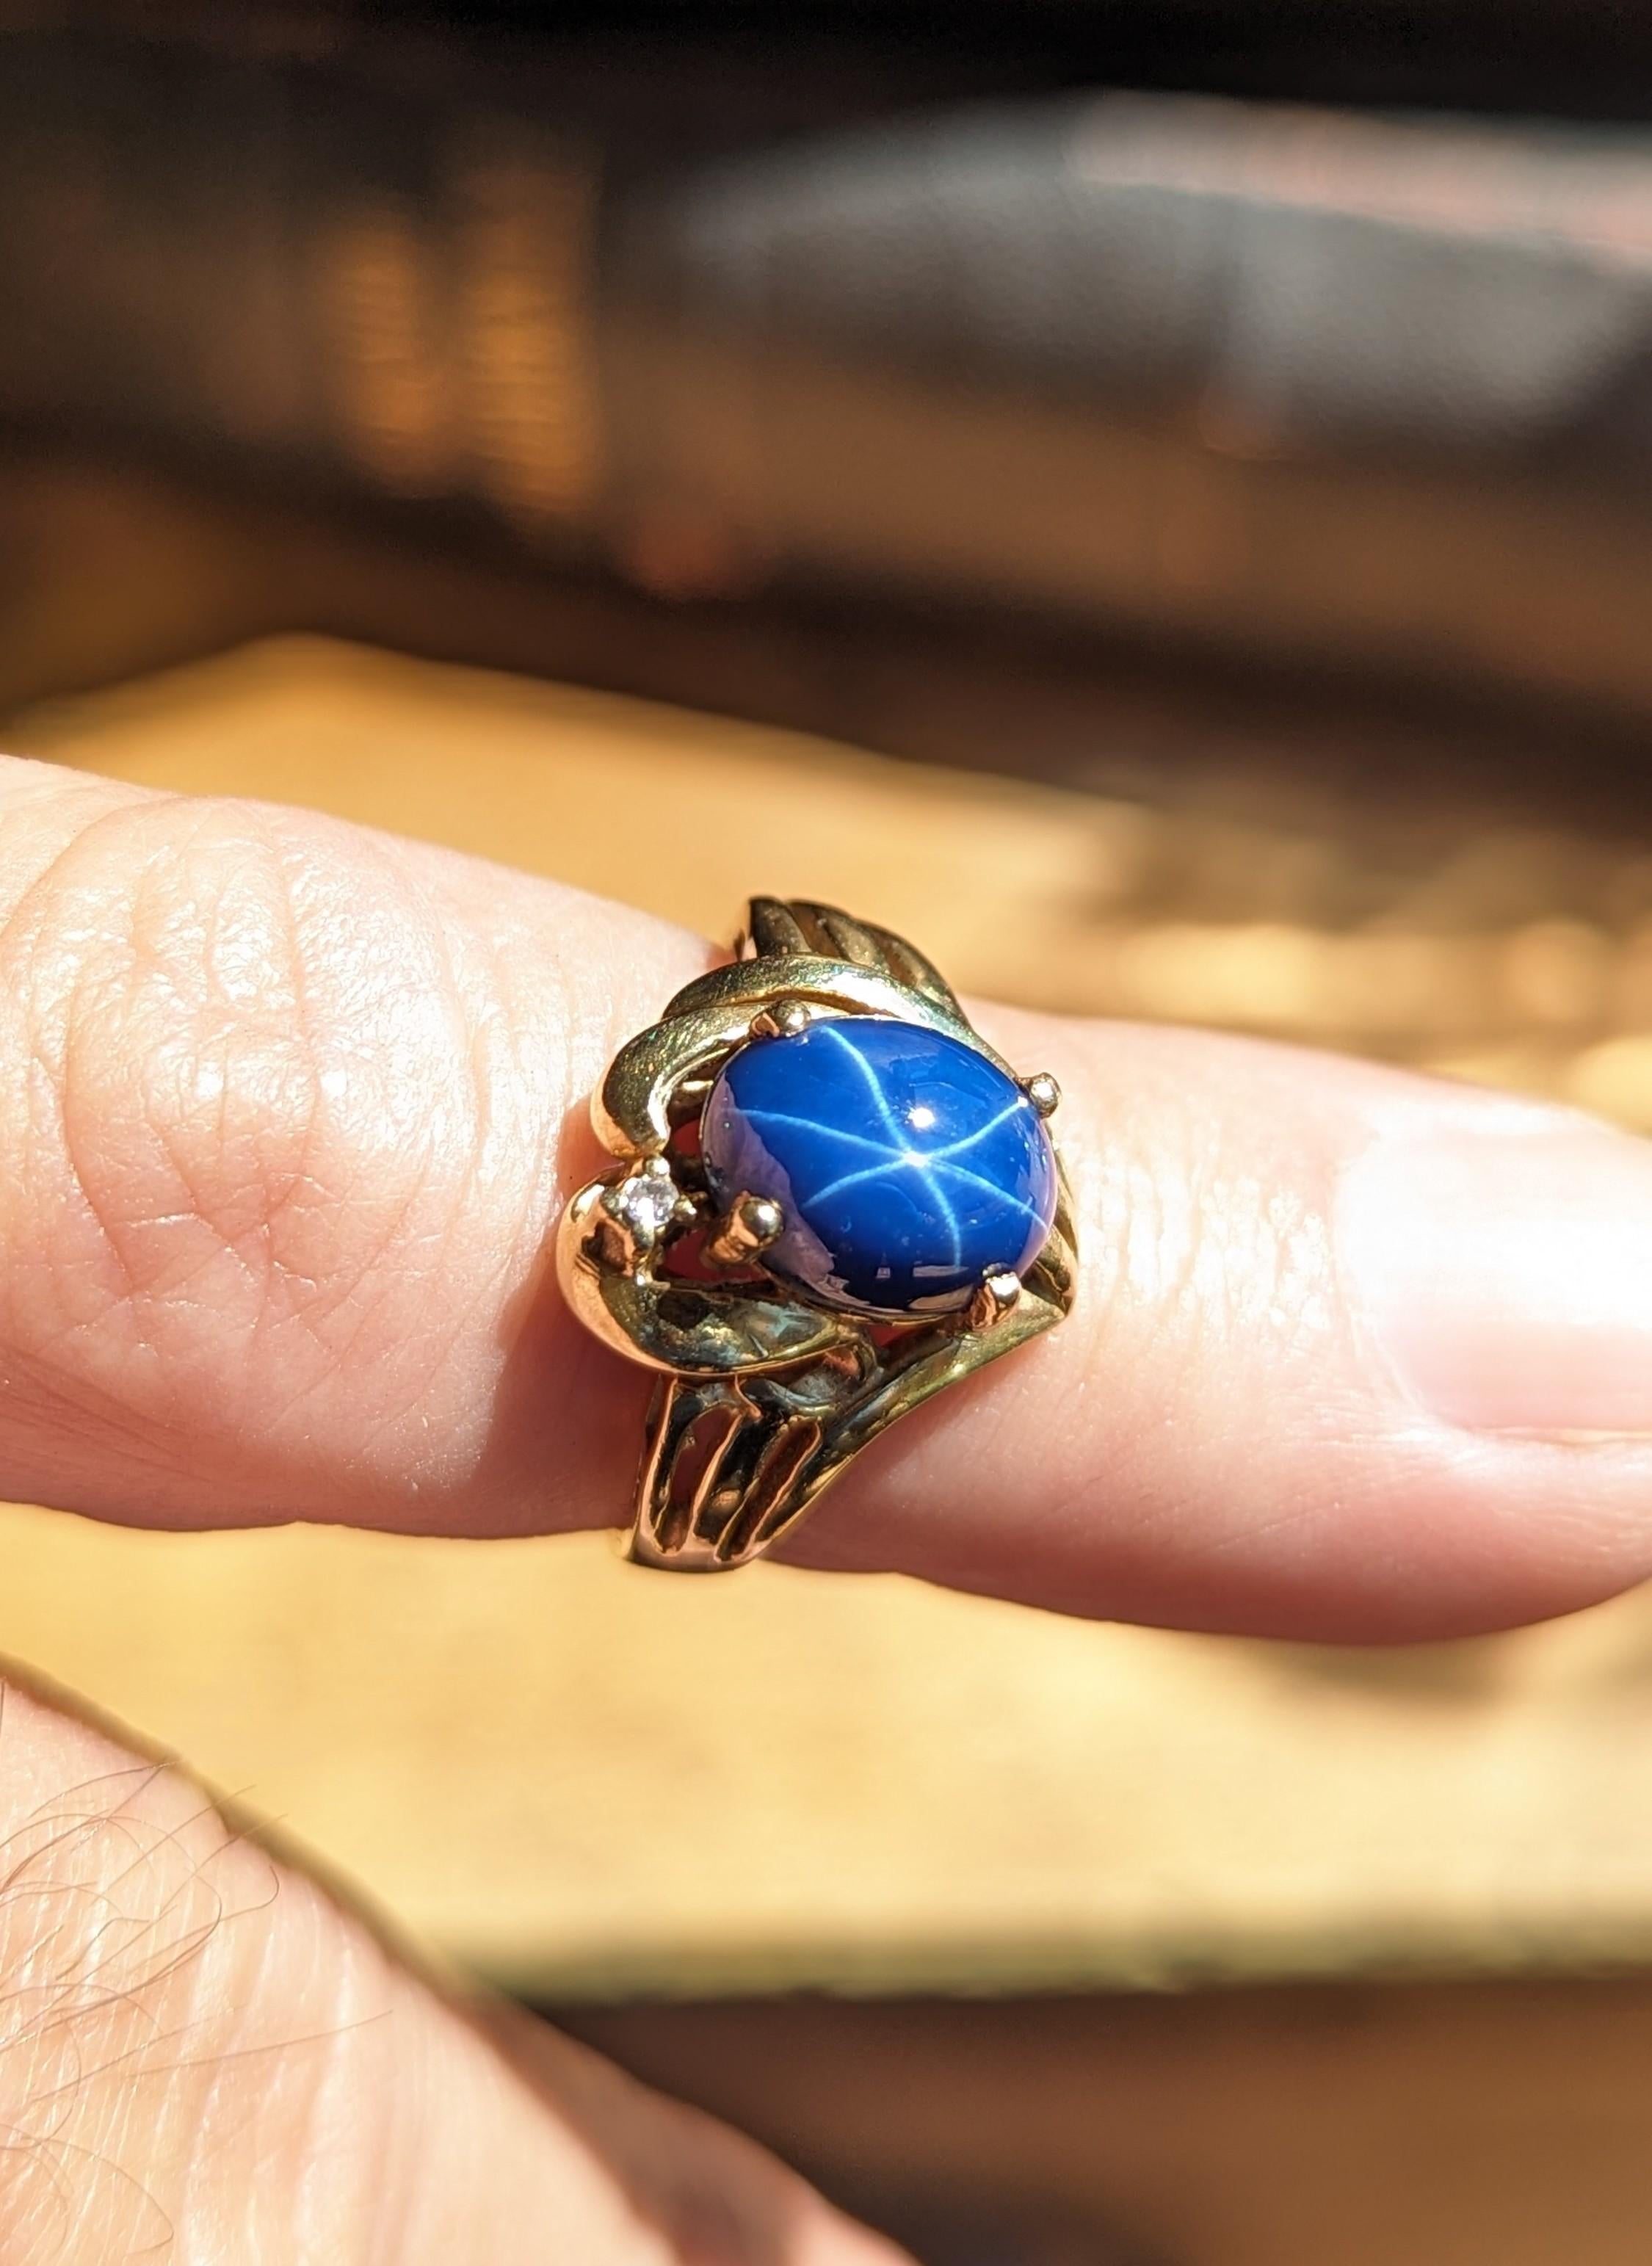 Elegant vintage blue star sapphire ring set in solid 14k yellow gold featuring a diamond accent. Open work metal with a flowing ribbon design, best fits for a size 6.25 finger. Measures 14.5mm at its tallest points by 2.8mm at its smallest points,